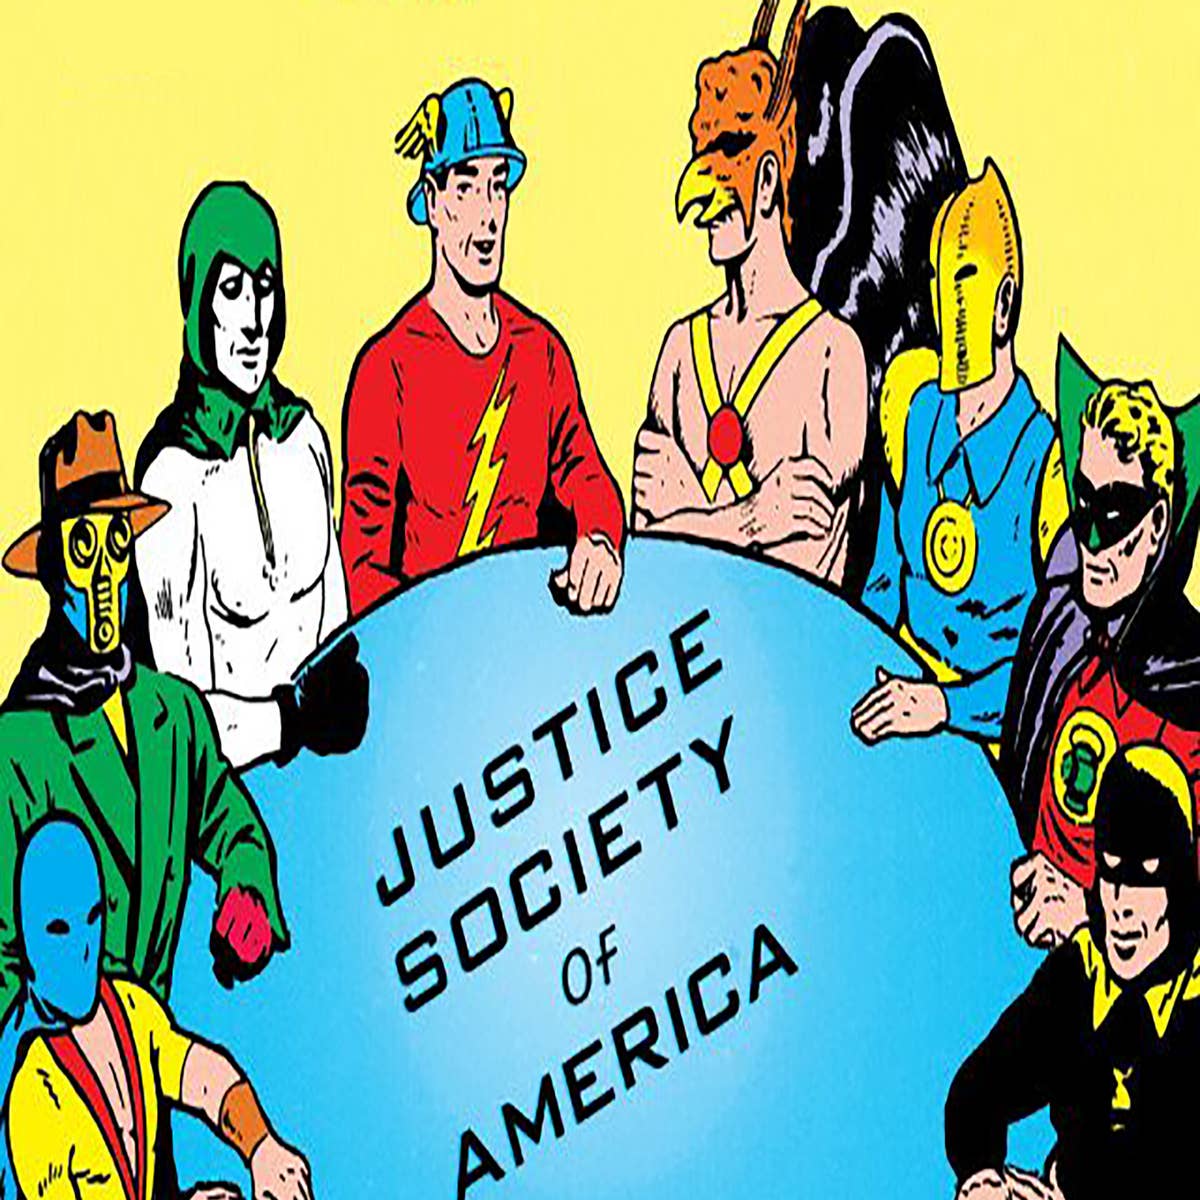 Black Adam: What To Know About Its Characters And The JSA